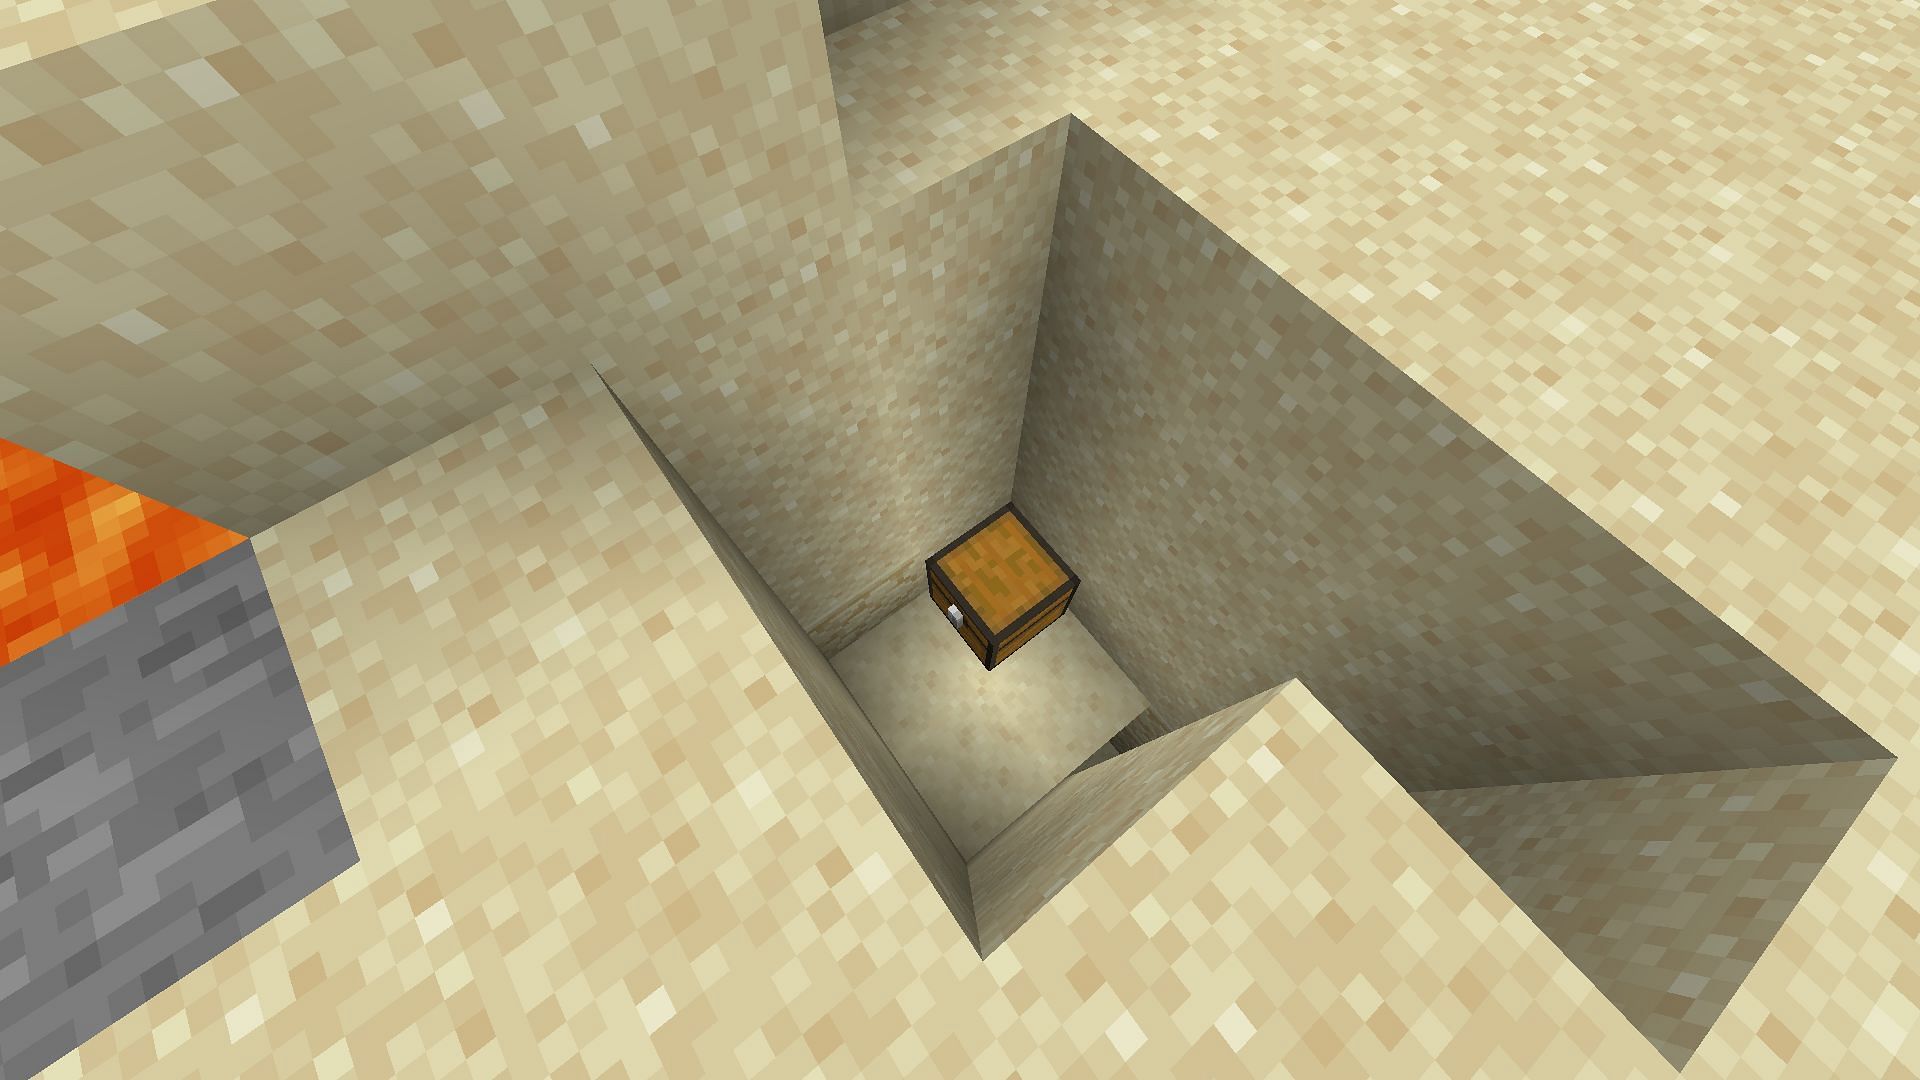 Buried treasure chests give players loads of useful items to get a headstart in the game (Image via Mojang)